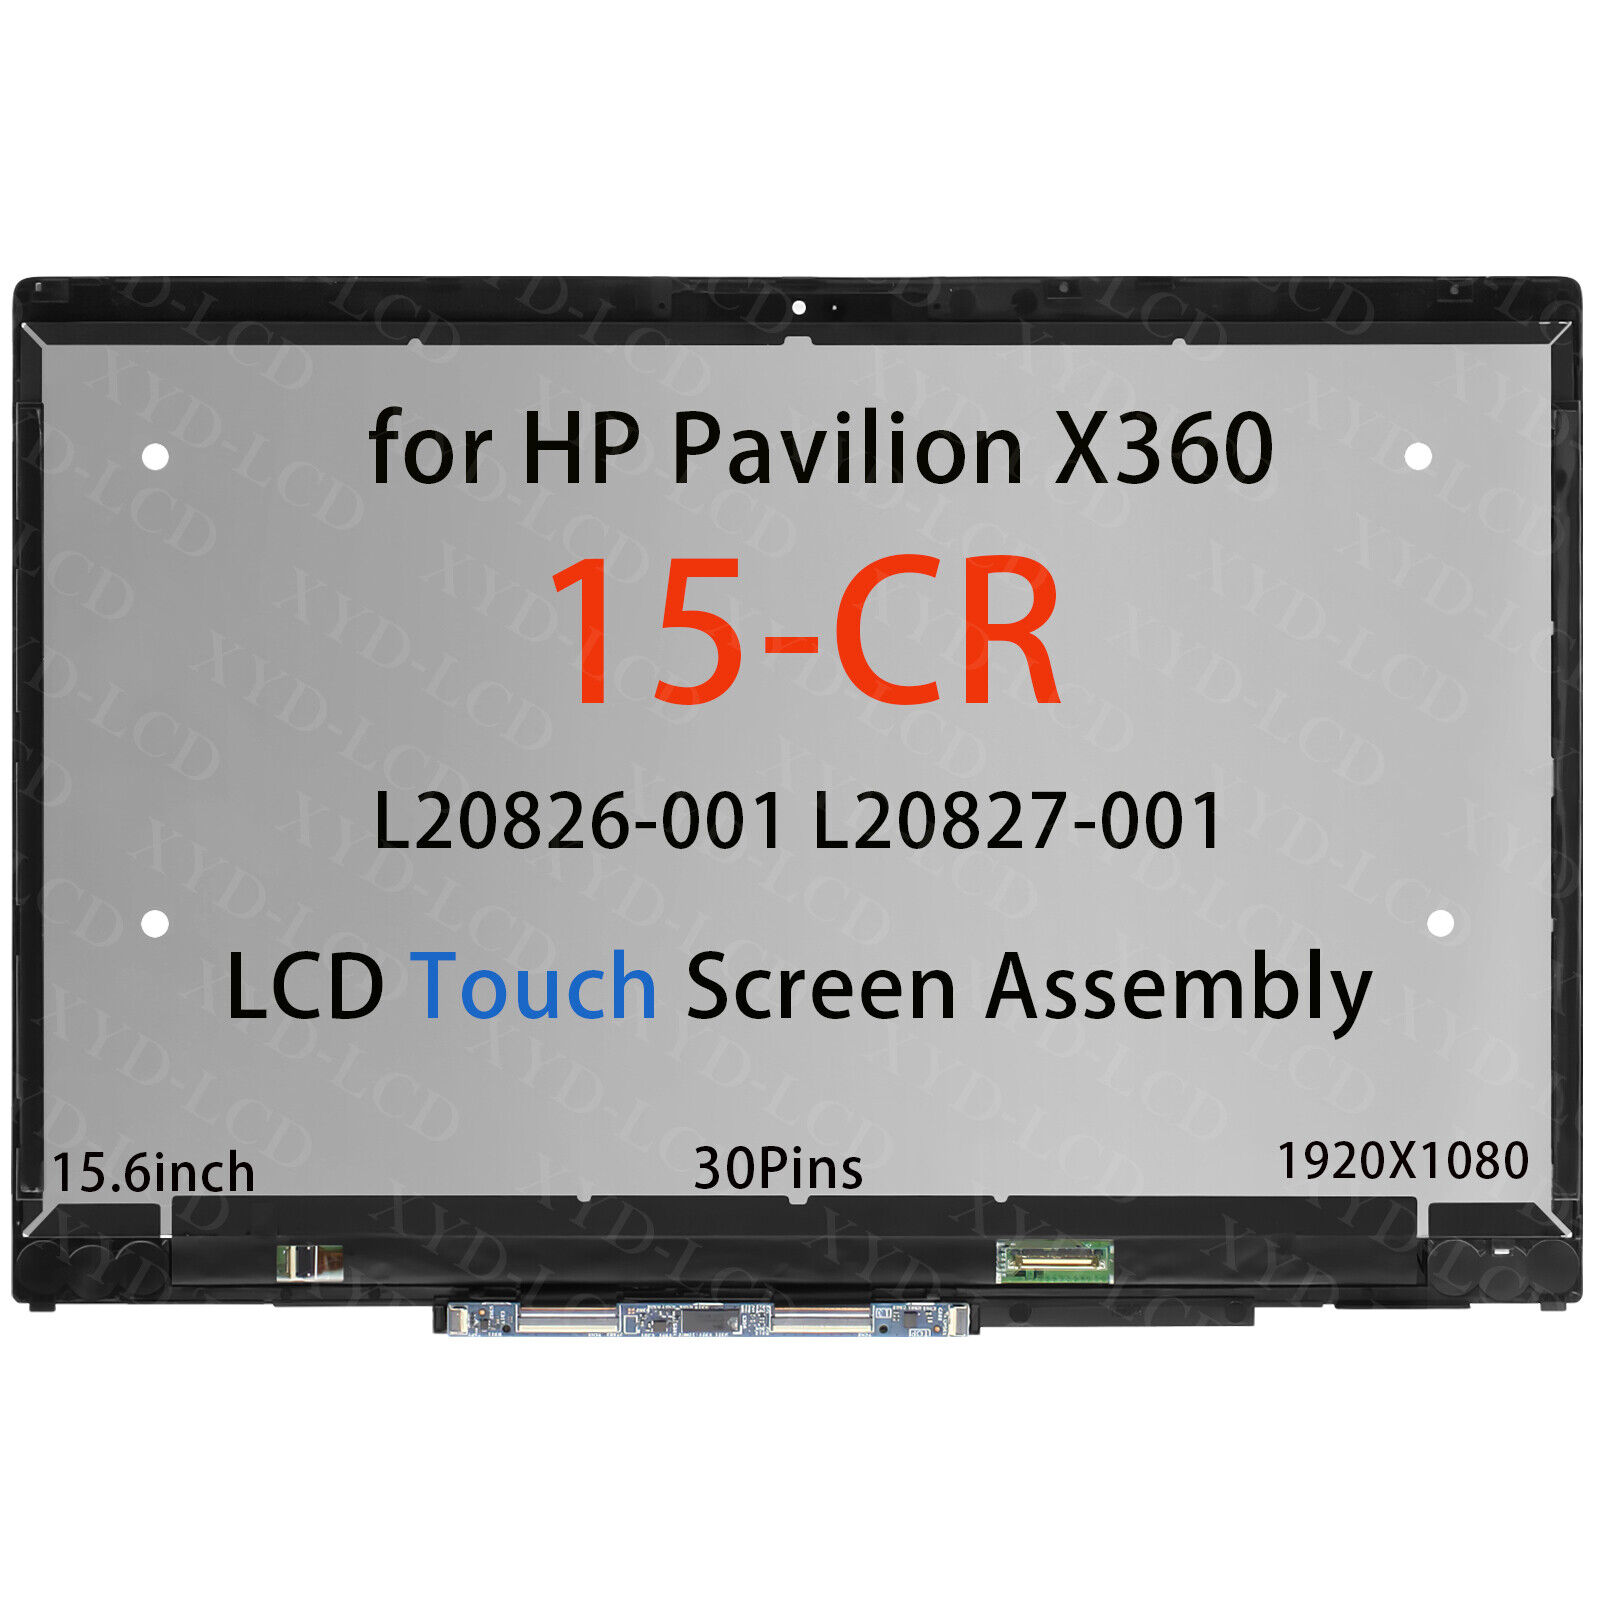 New LCD Touch Screen Digitizer Assembly for HP Pavilion x360 15-CR L20827-001